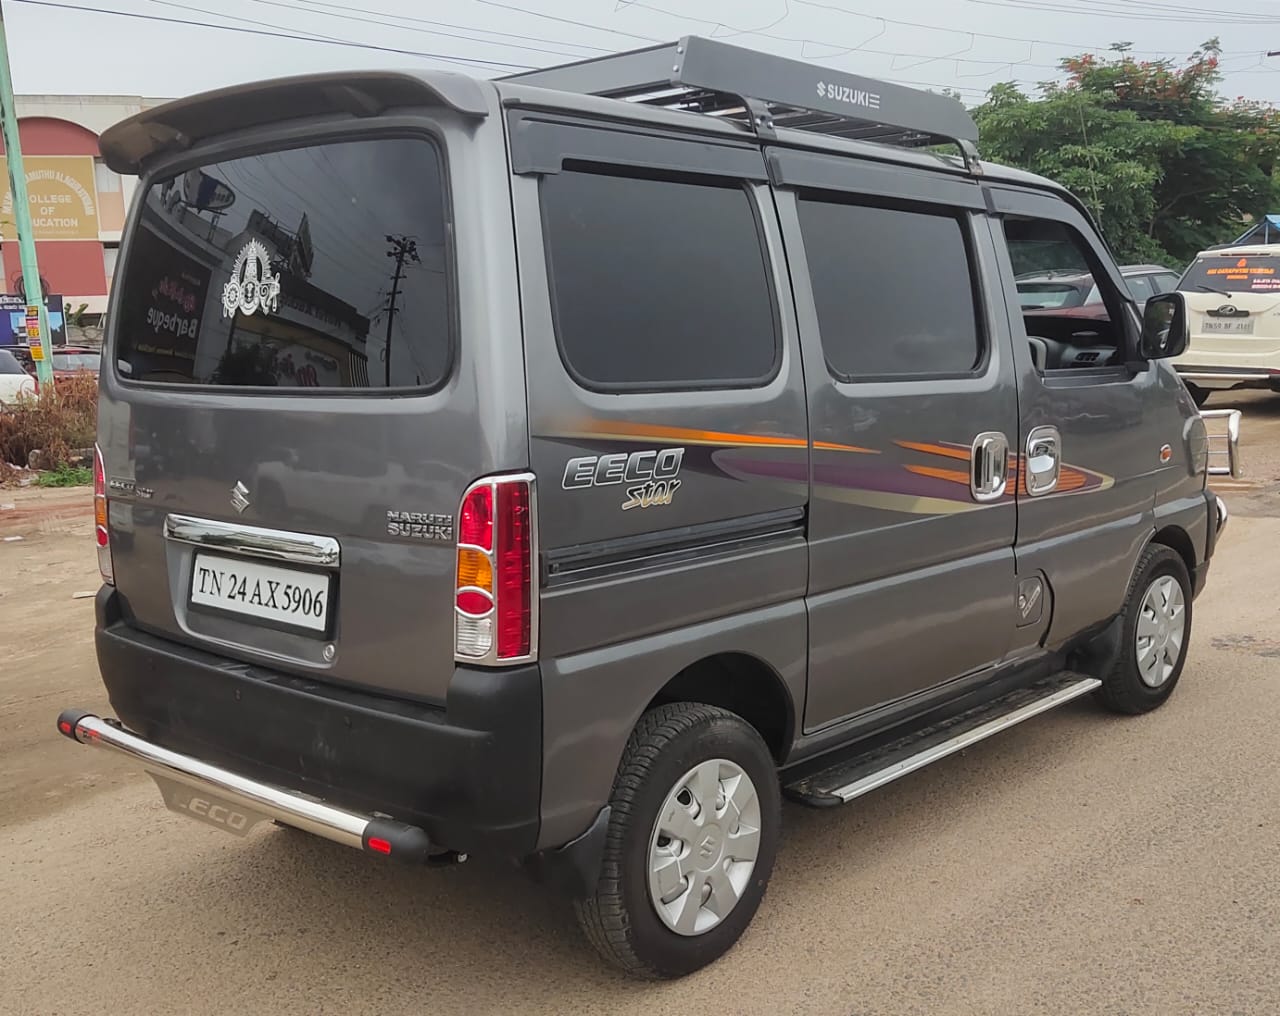 4343-for-sale-Maruthi-Suzuki-Eeco-Petrol-First-Owner-2022-TN-registered-rs-590000